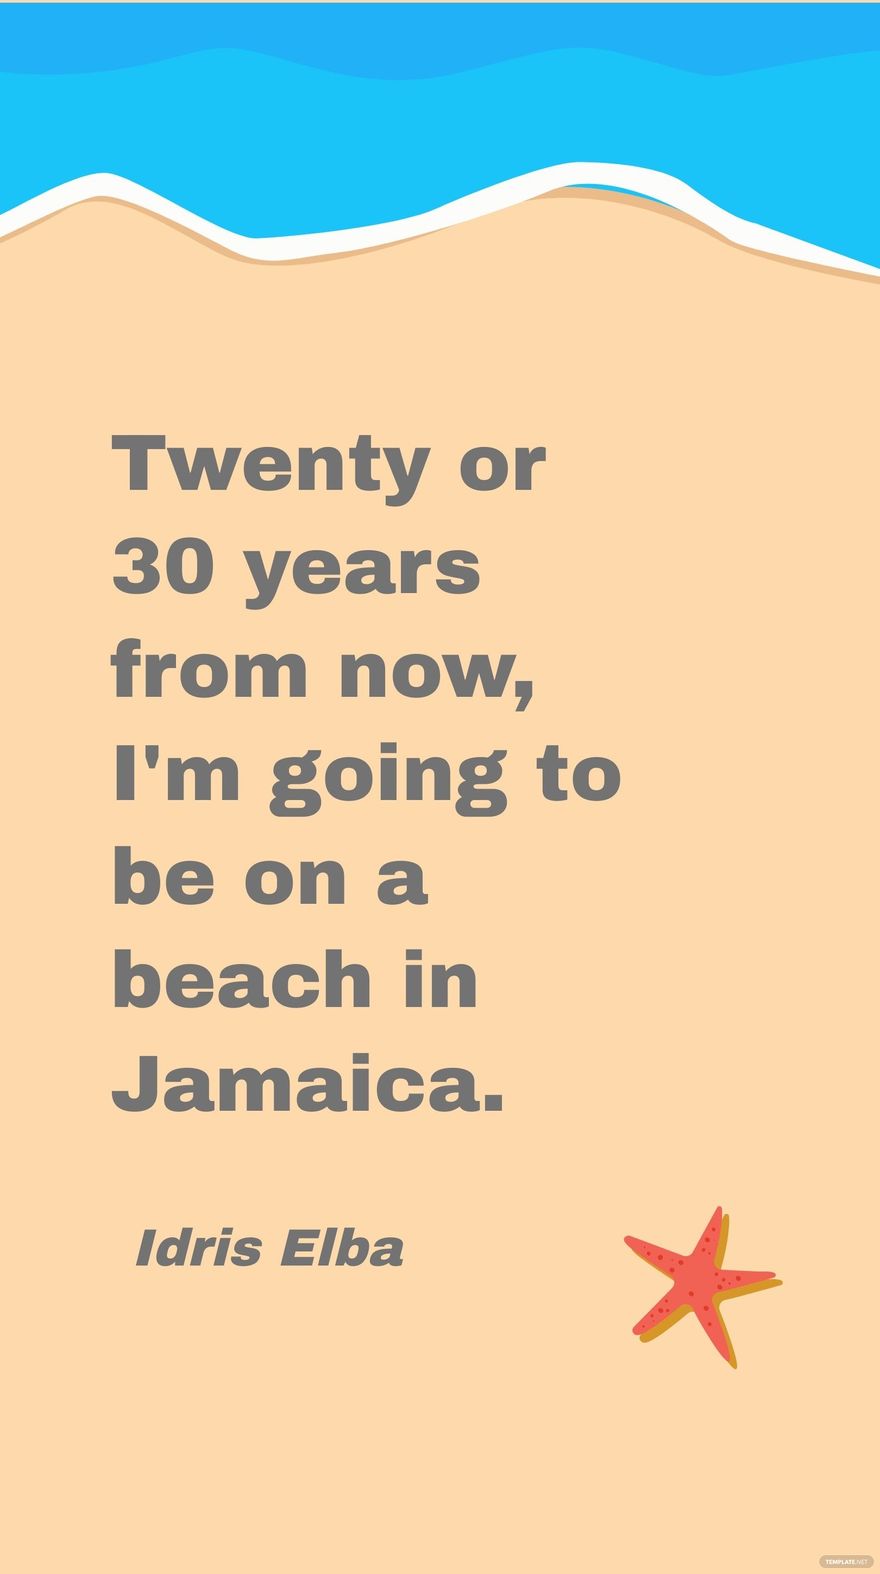 Idris Elba - Twenty or 30 years from now, I'm going to be on a beach in Jamaica.